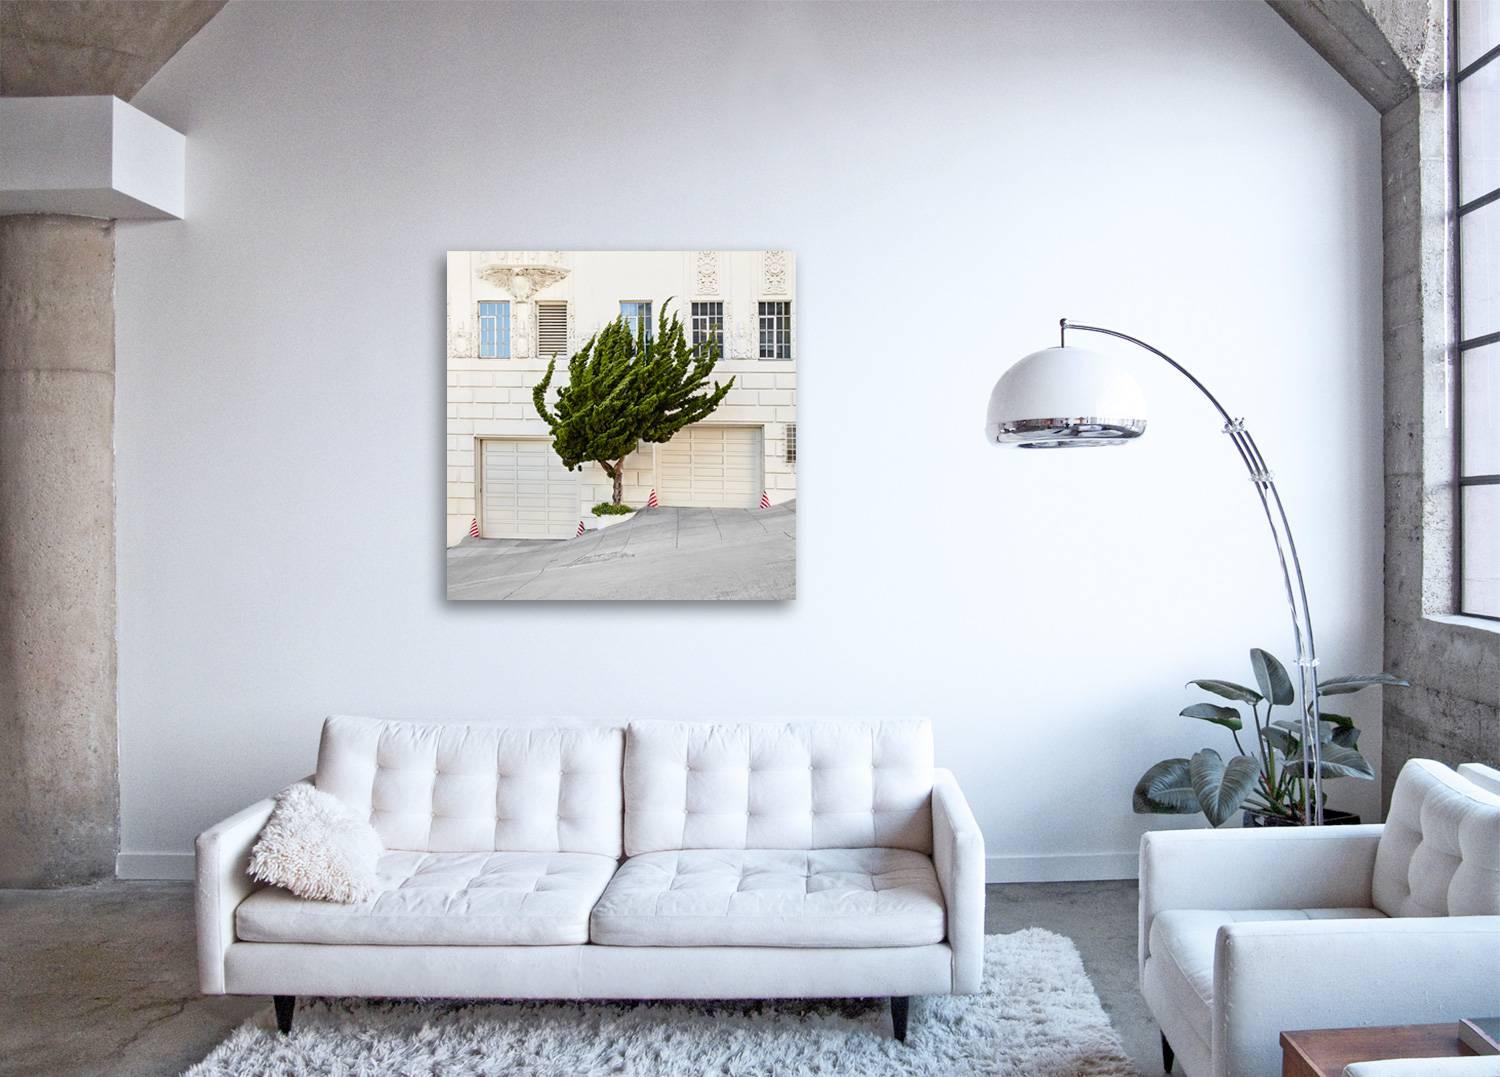 Topiary I (framed) - large format photograph of ornamental shaped urban tree - Print by Frank Schott